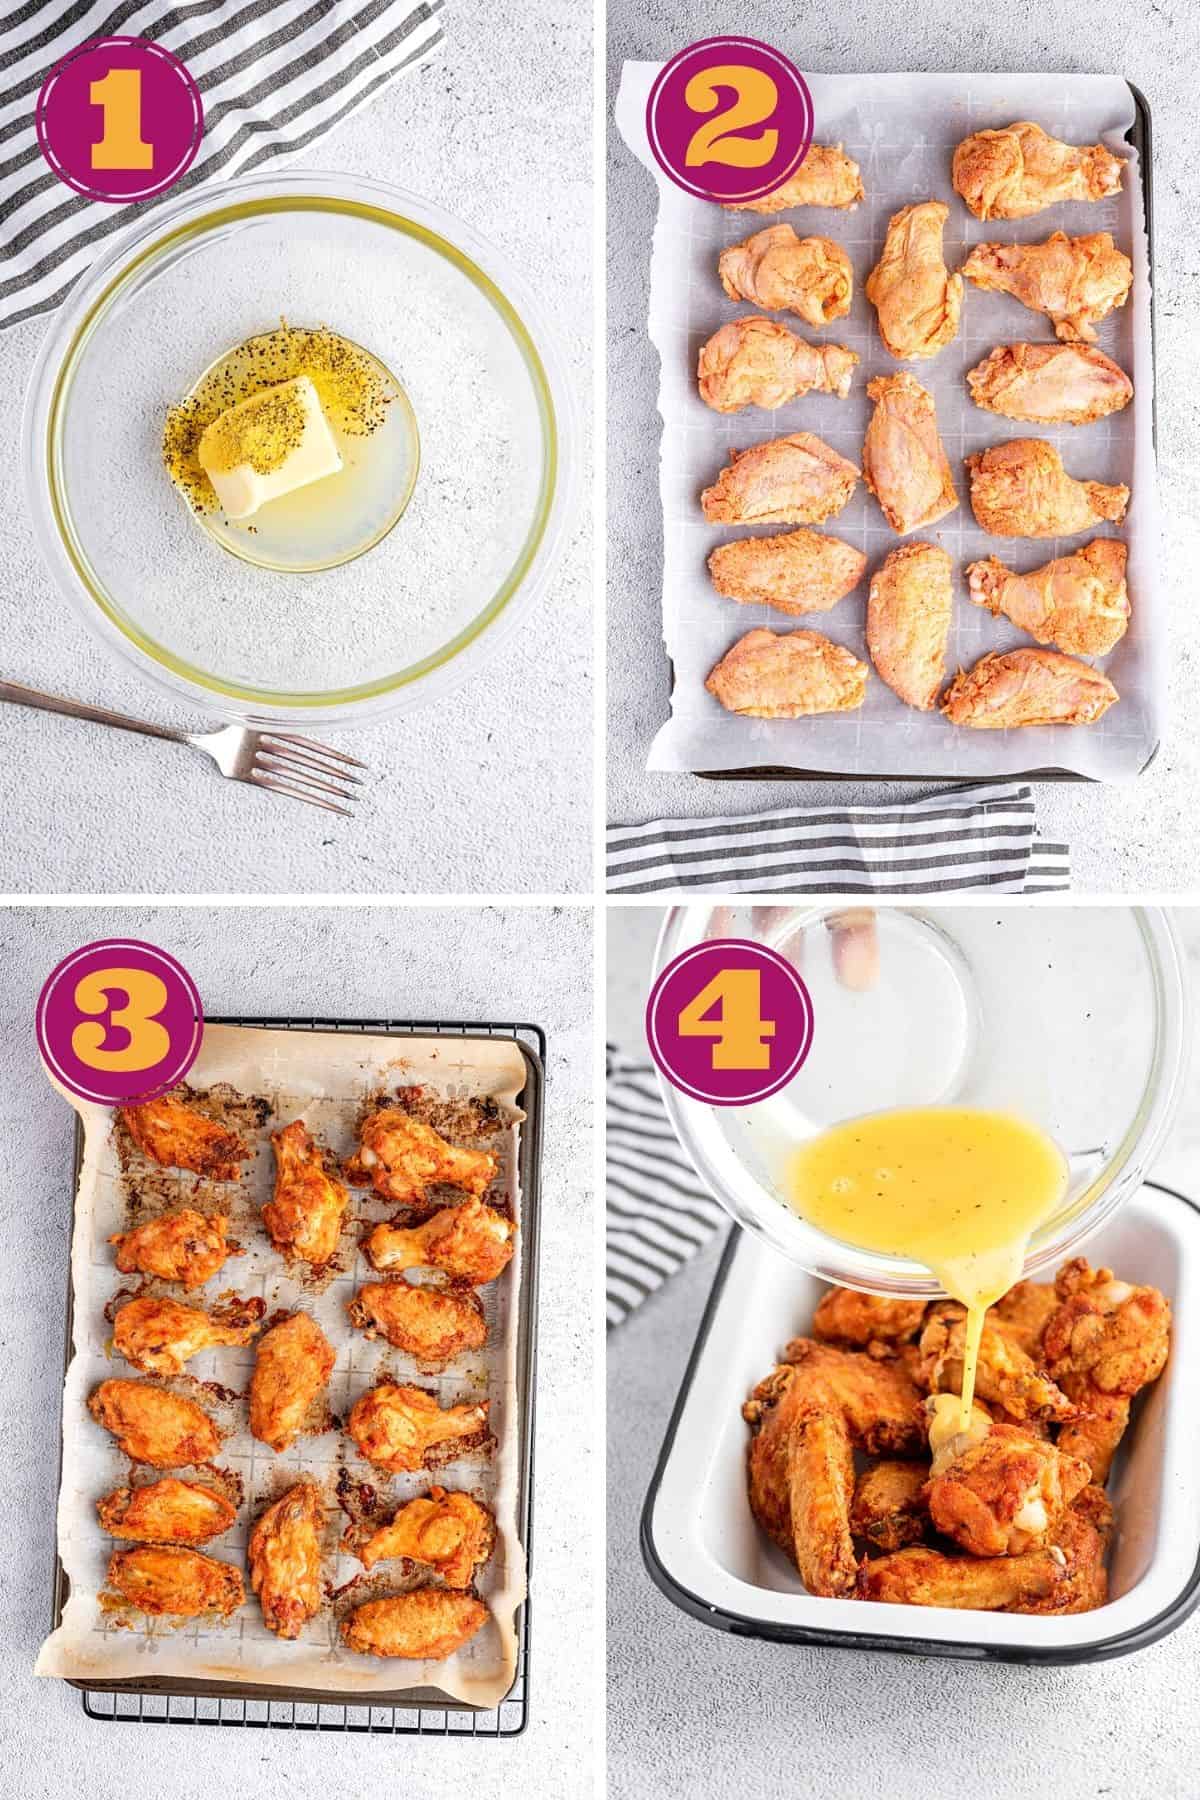 Four numbered pictures: first, a mixing bowl with butter, lemon juice, and lemon pepper seasoning, next to a fork; second, a baking sheet with parchment paper and seasoned, uncooked wings on it; third, a baking sheet with parchment paper and baked wings on it; and fourth, a tray of wings with a hand pouring a bowl of lemon pepper seasoning on them.